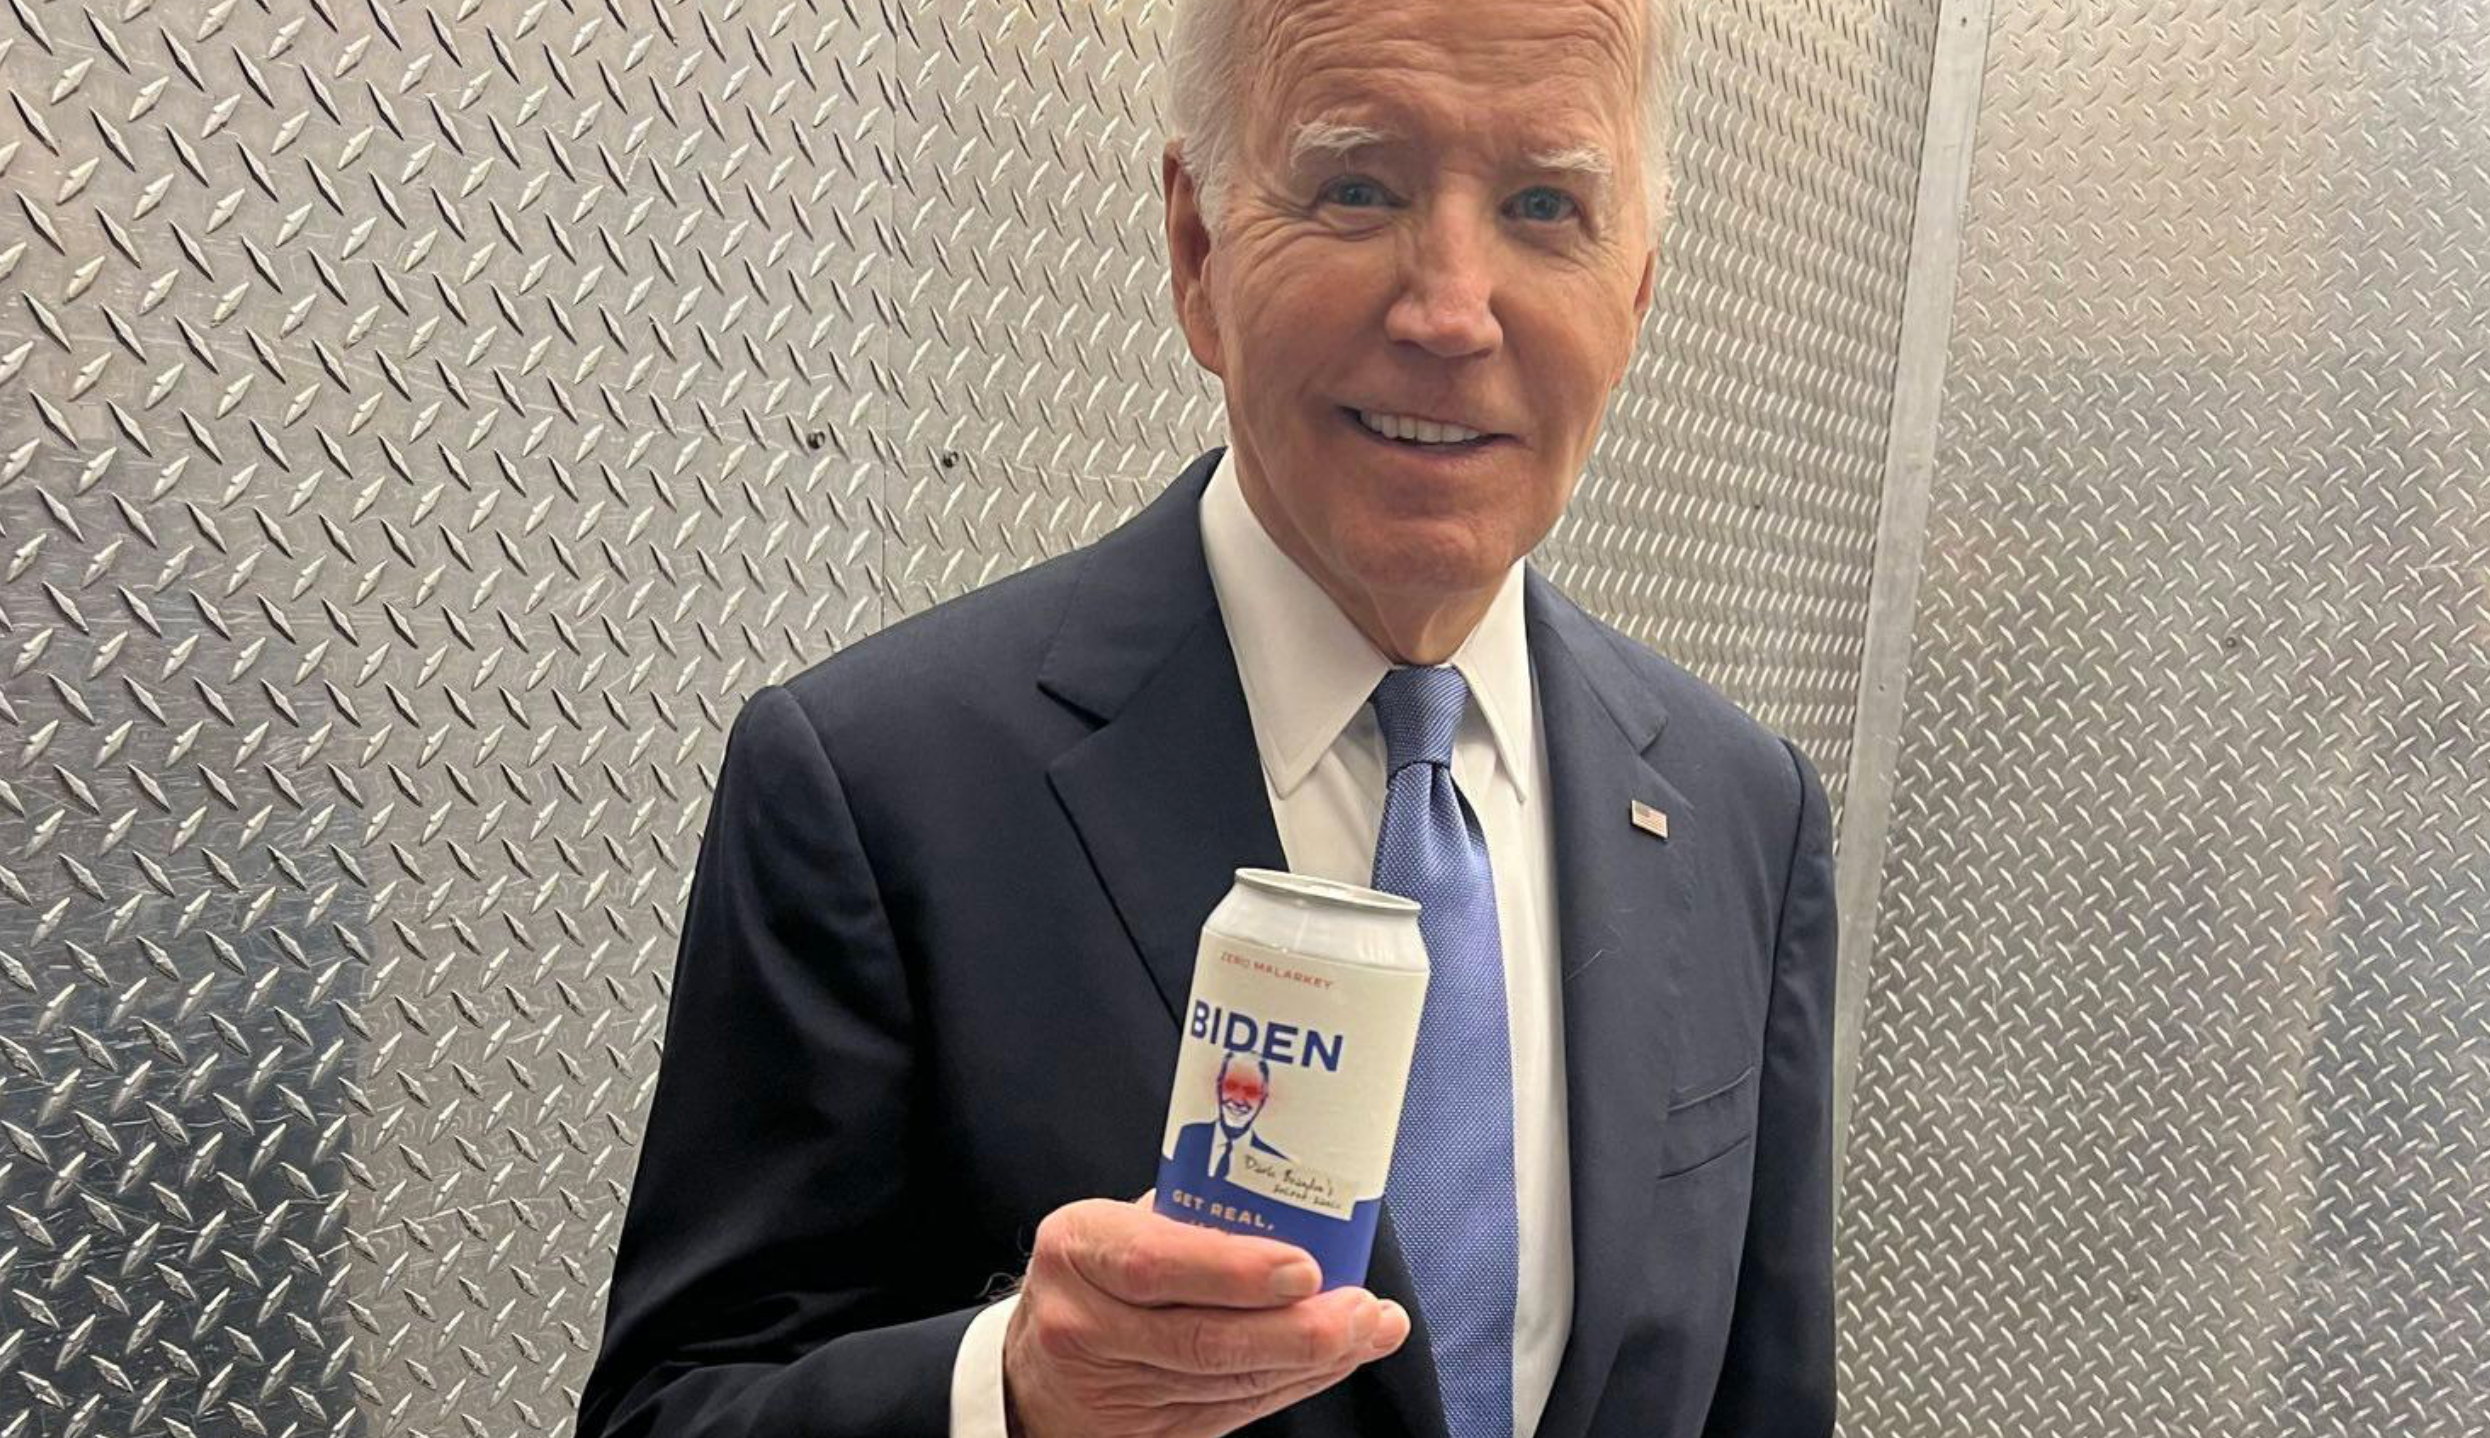 President Joe Biden poses with a can of water on June 27 mocking Donald Trump’s unsubstantiated claims that the president is using performance-enhancing drugs